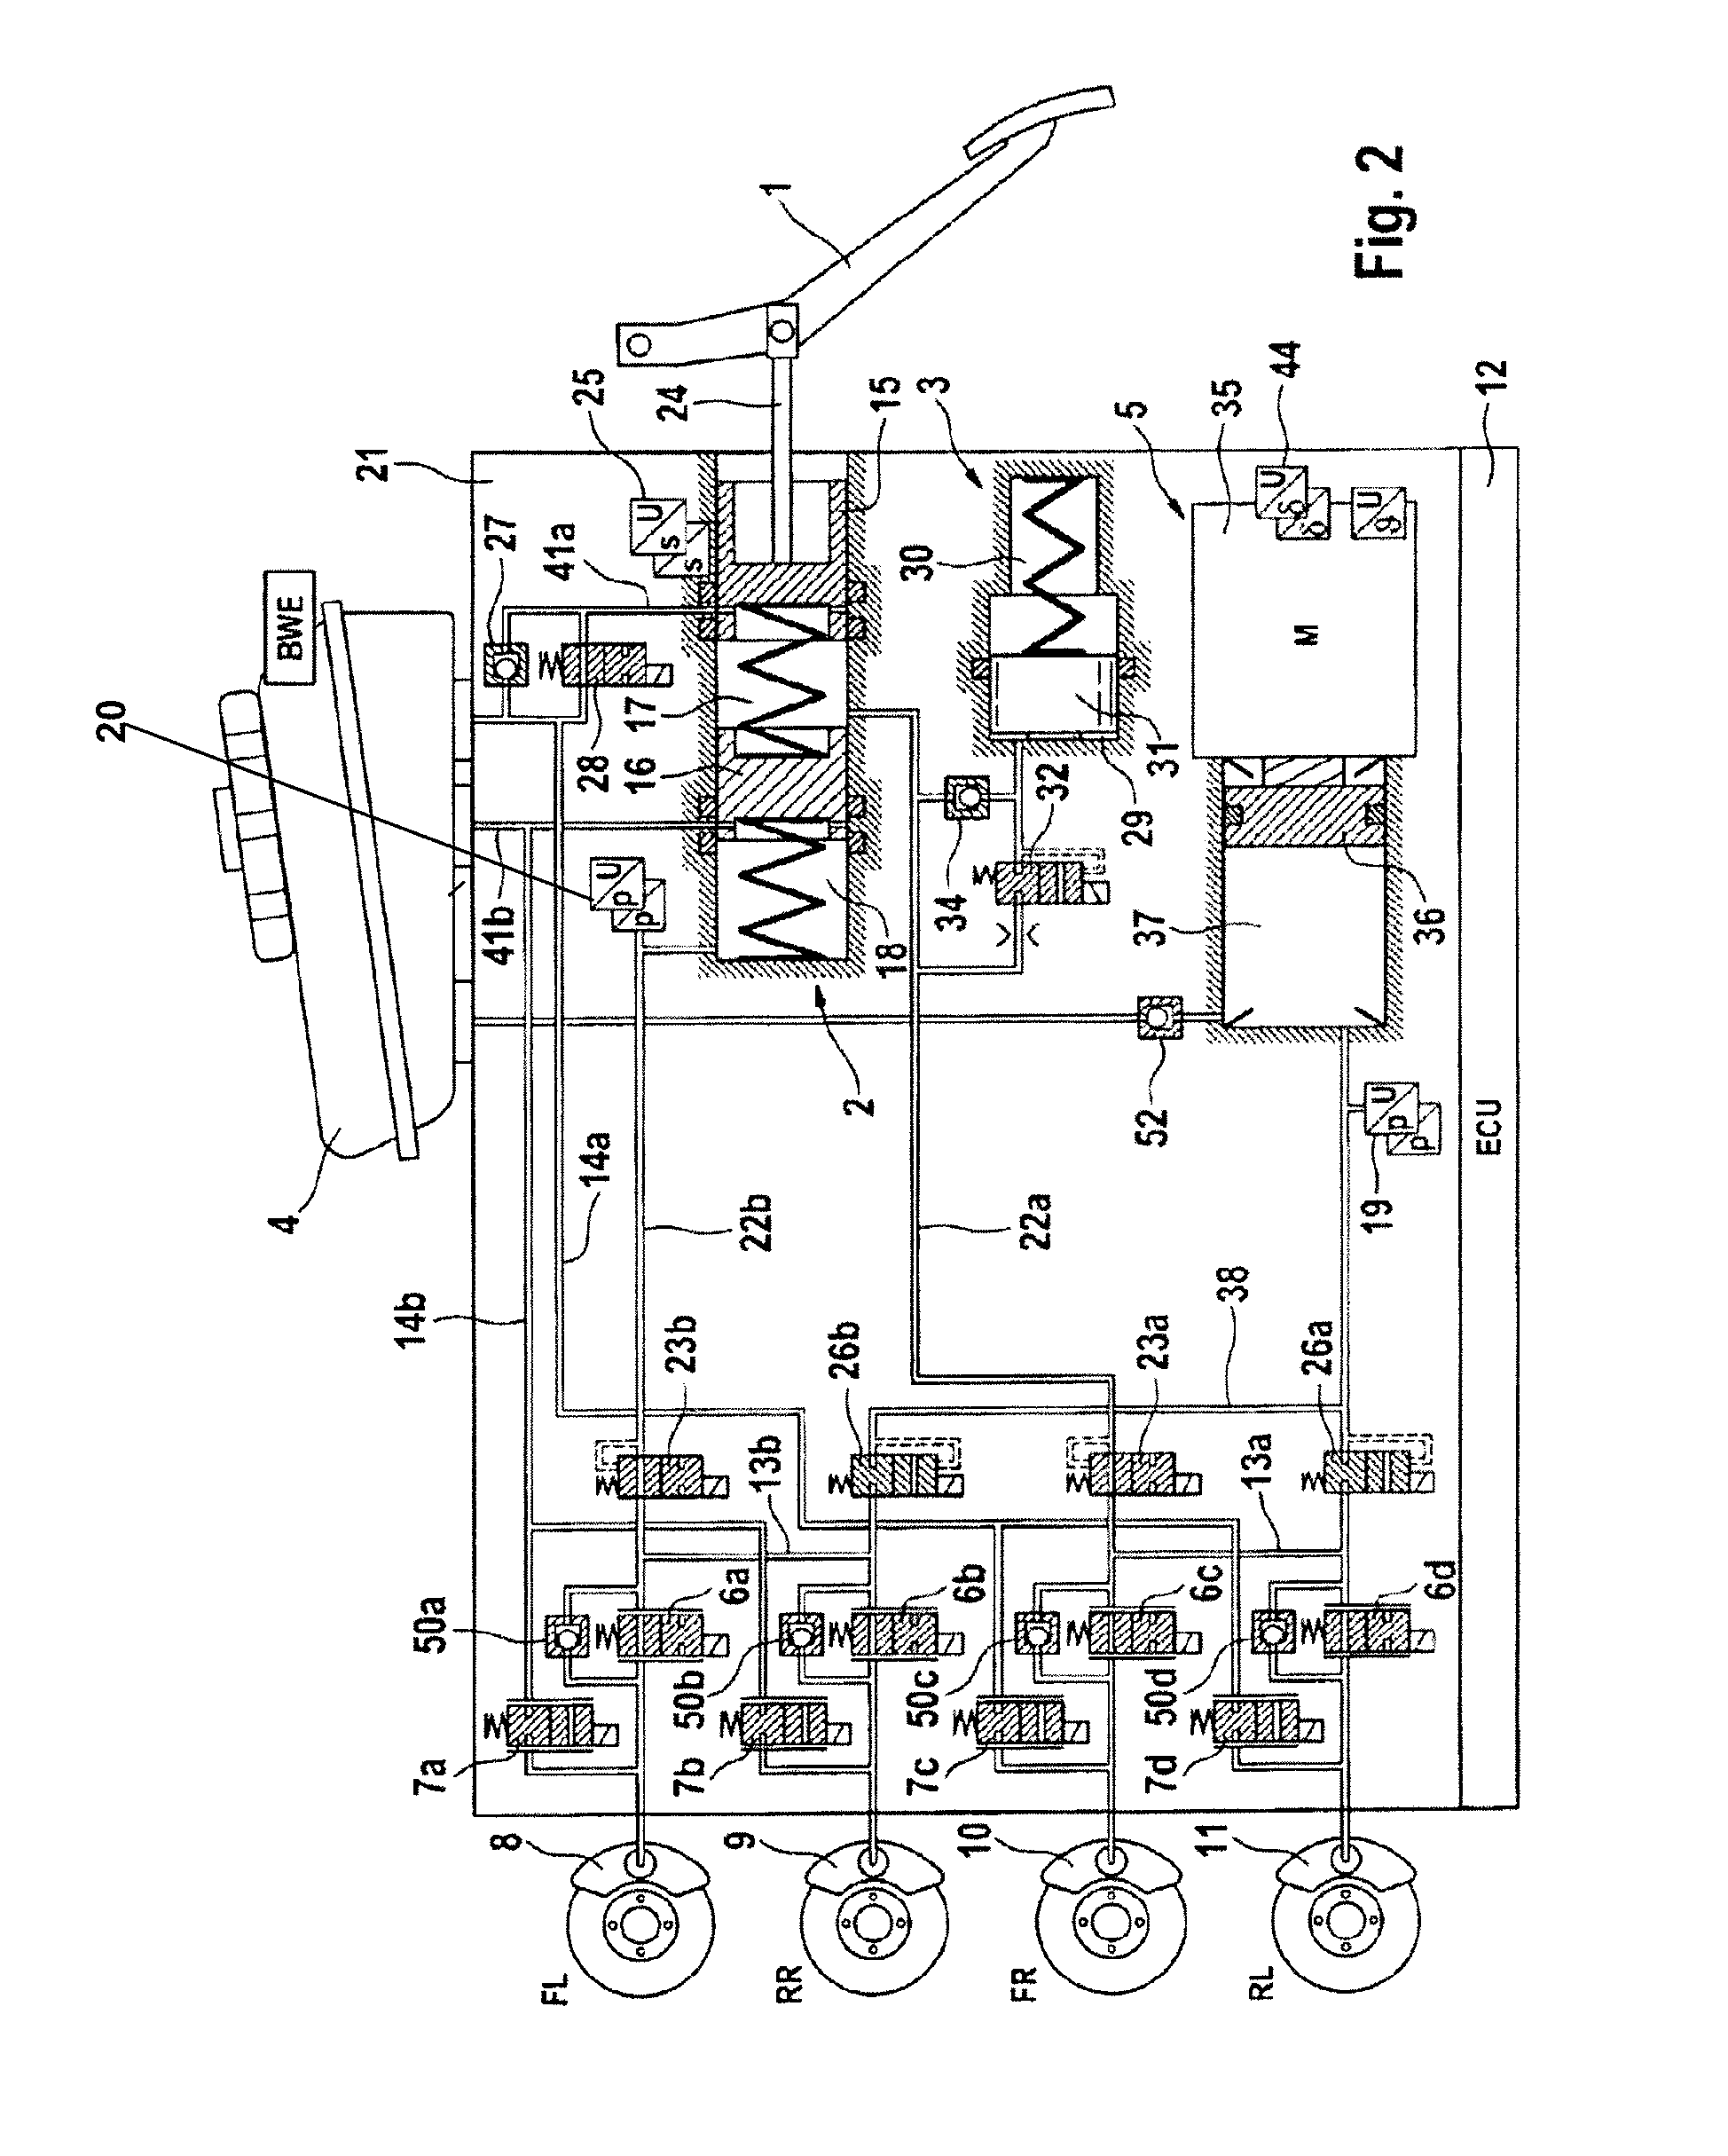 Method for calibrating analog-controlled hydraulic valves and brake system comprising an electronic control and regulating unit in which the method is carried out